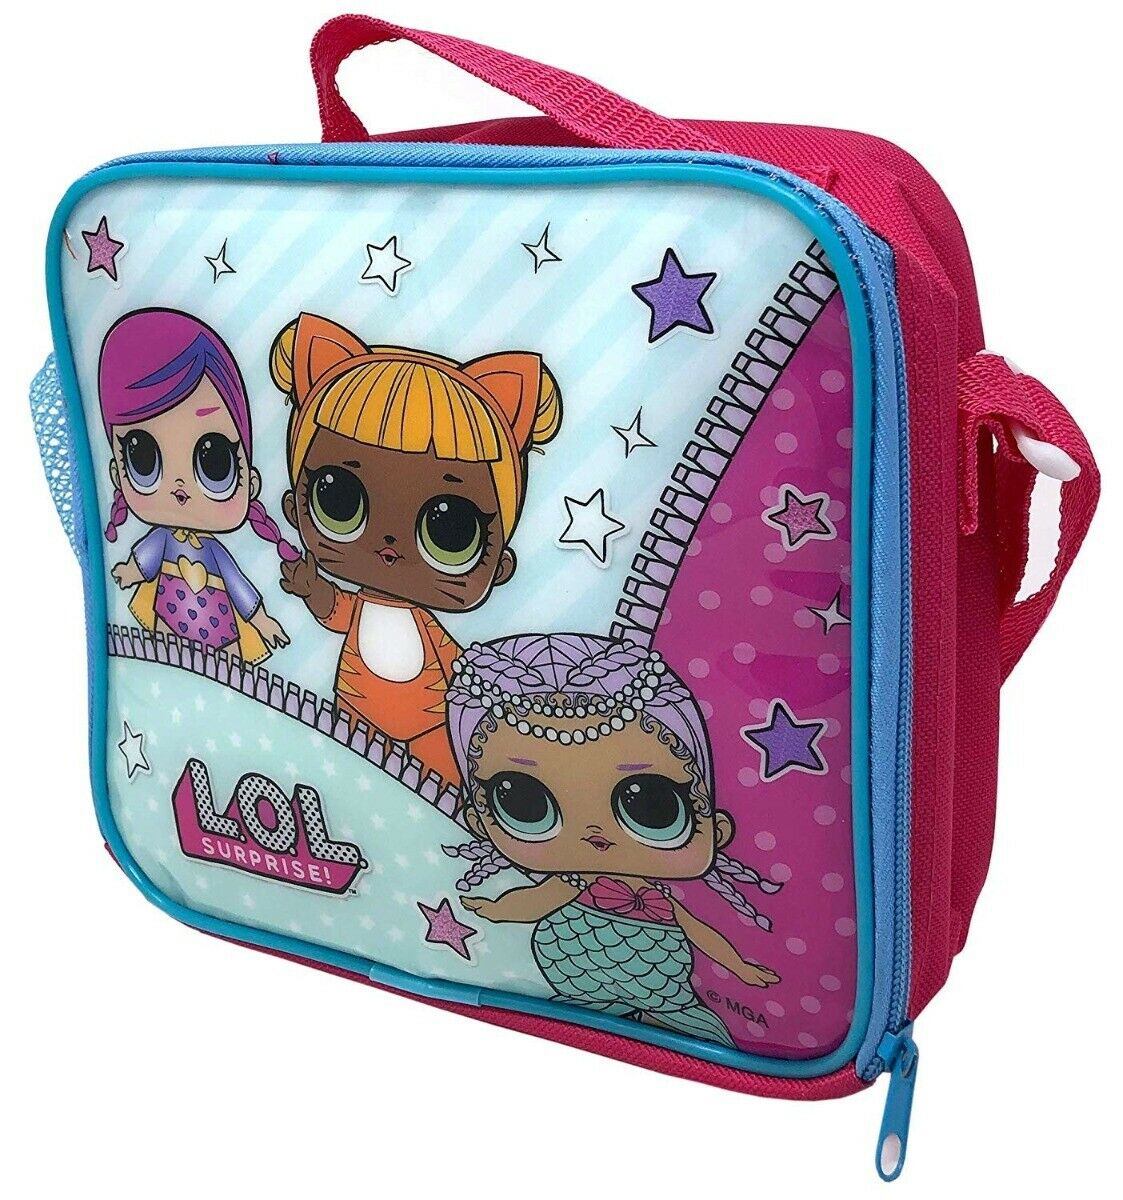 Lol Surprise Kids Thermal Insulated Bag Lunch Box